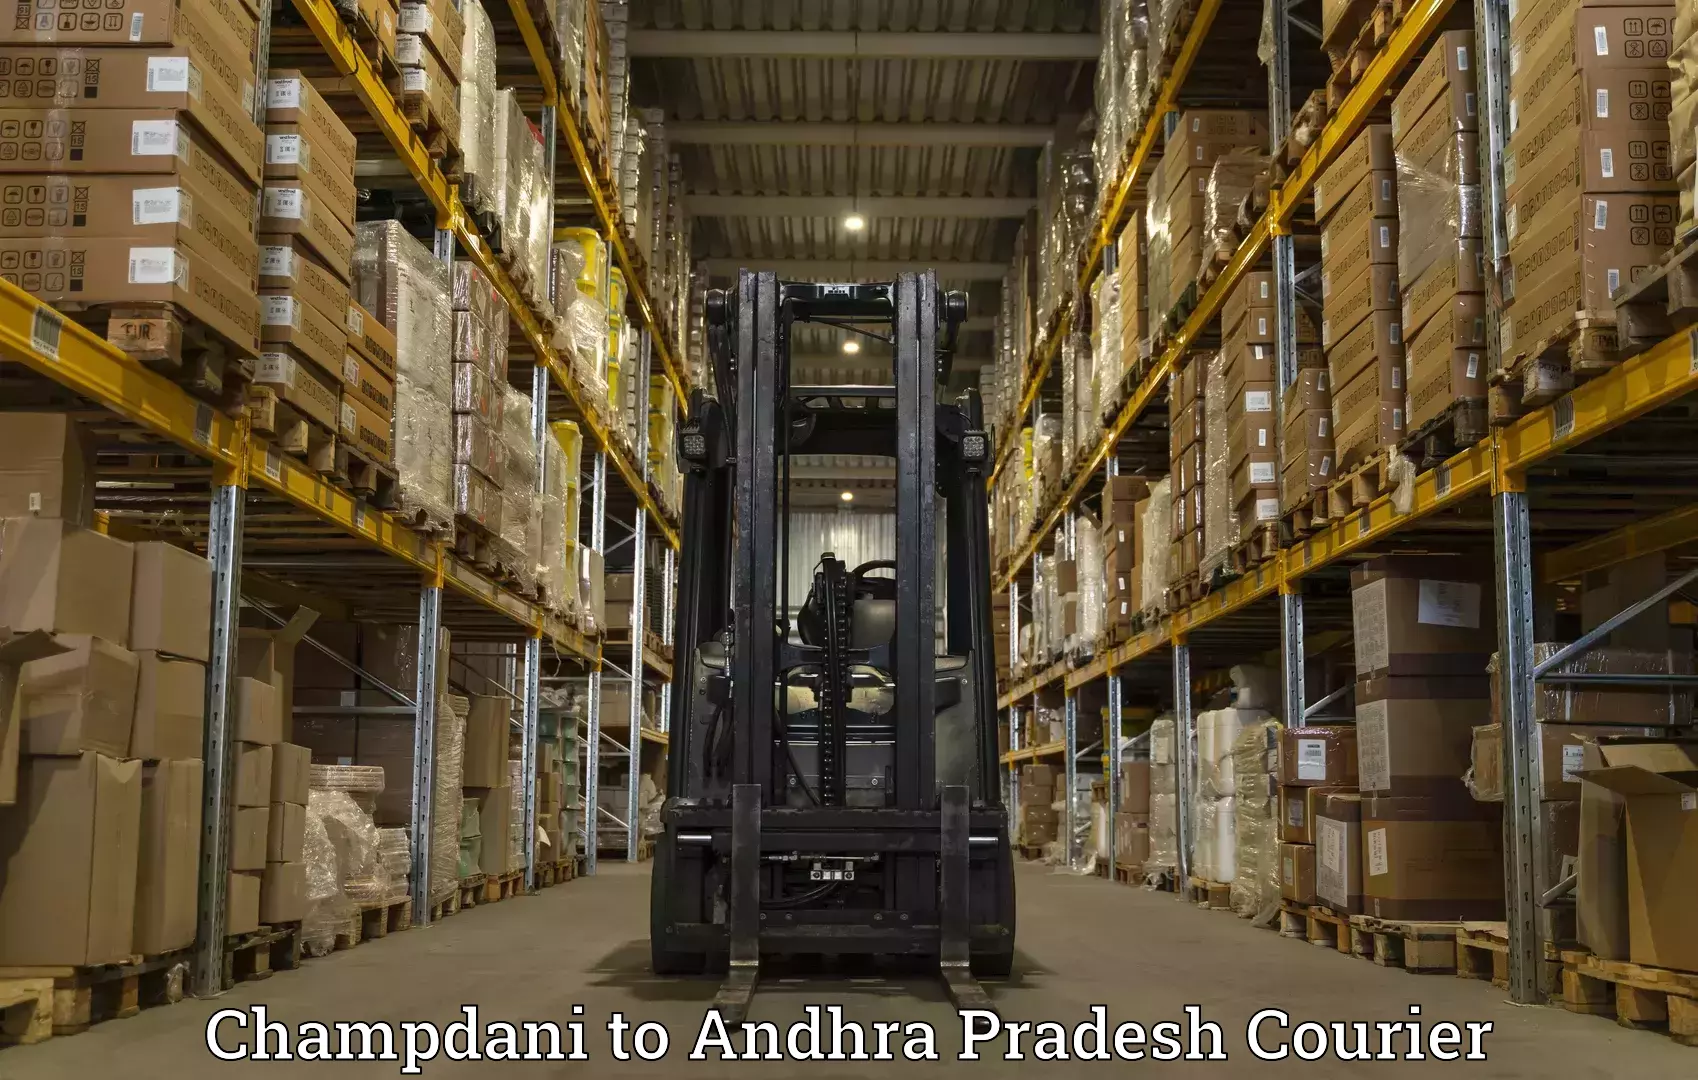 Reliable delivery network Champdani to Andhra Pradesh